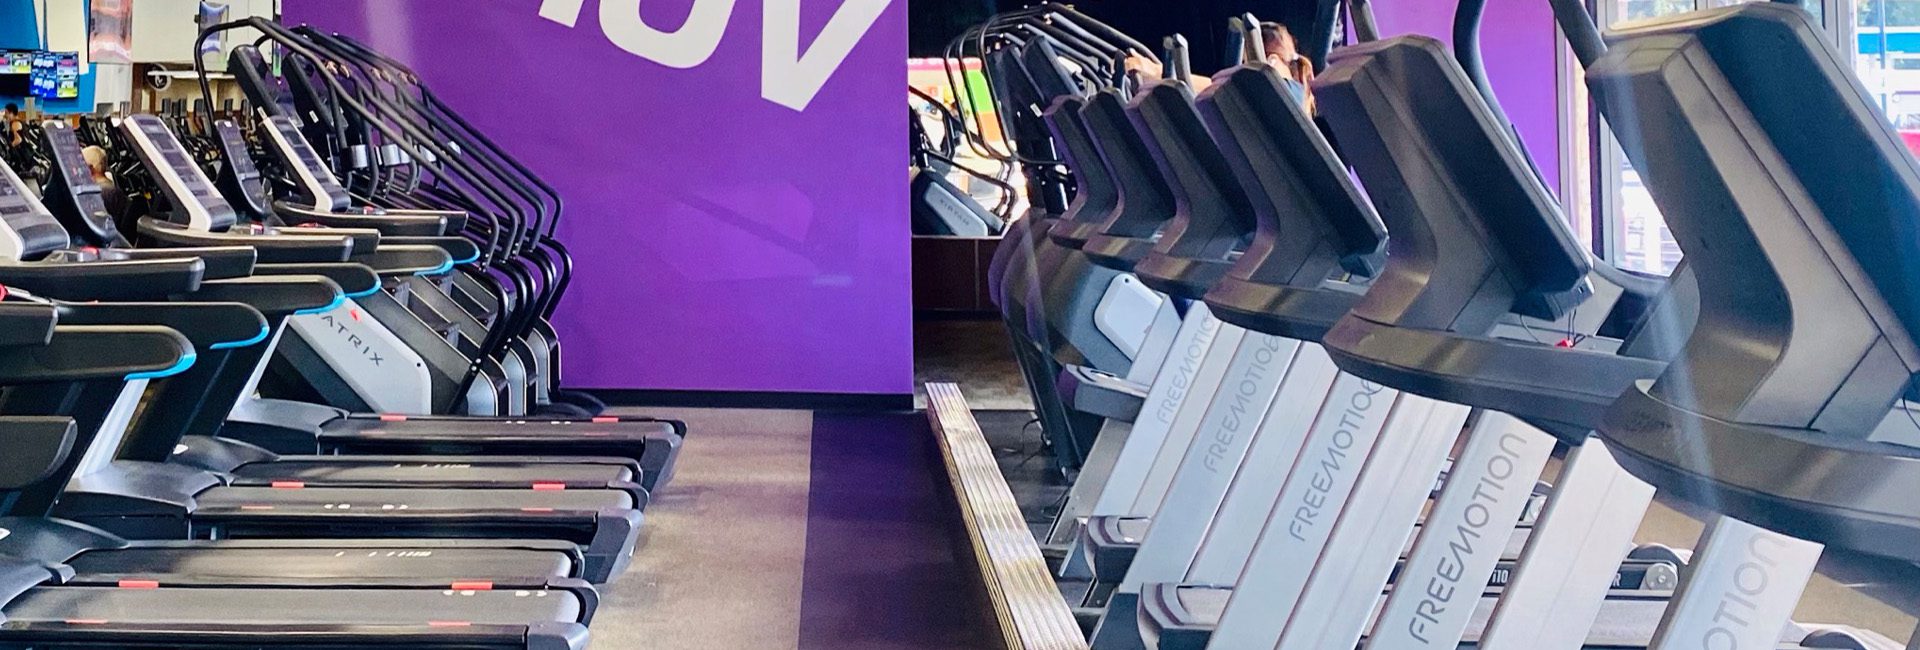 rows of treadmills and cardio equipment in the best gym near me